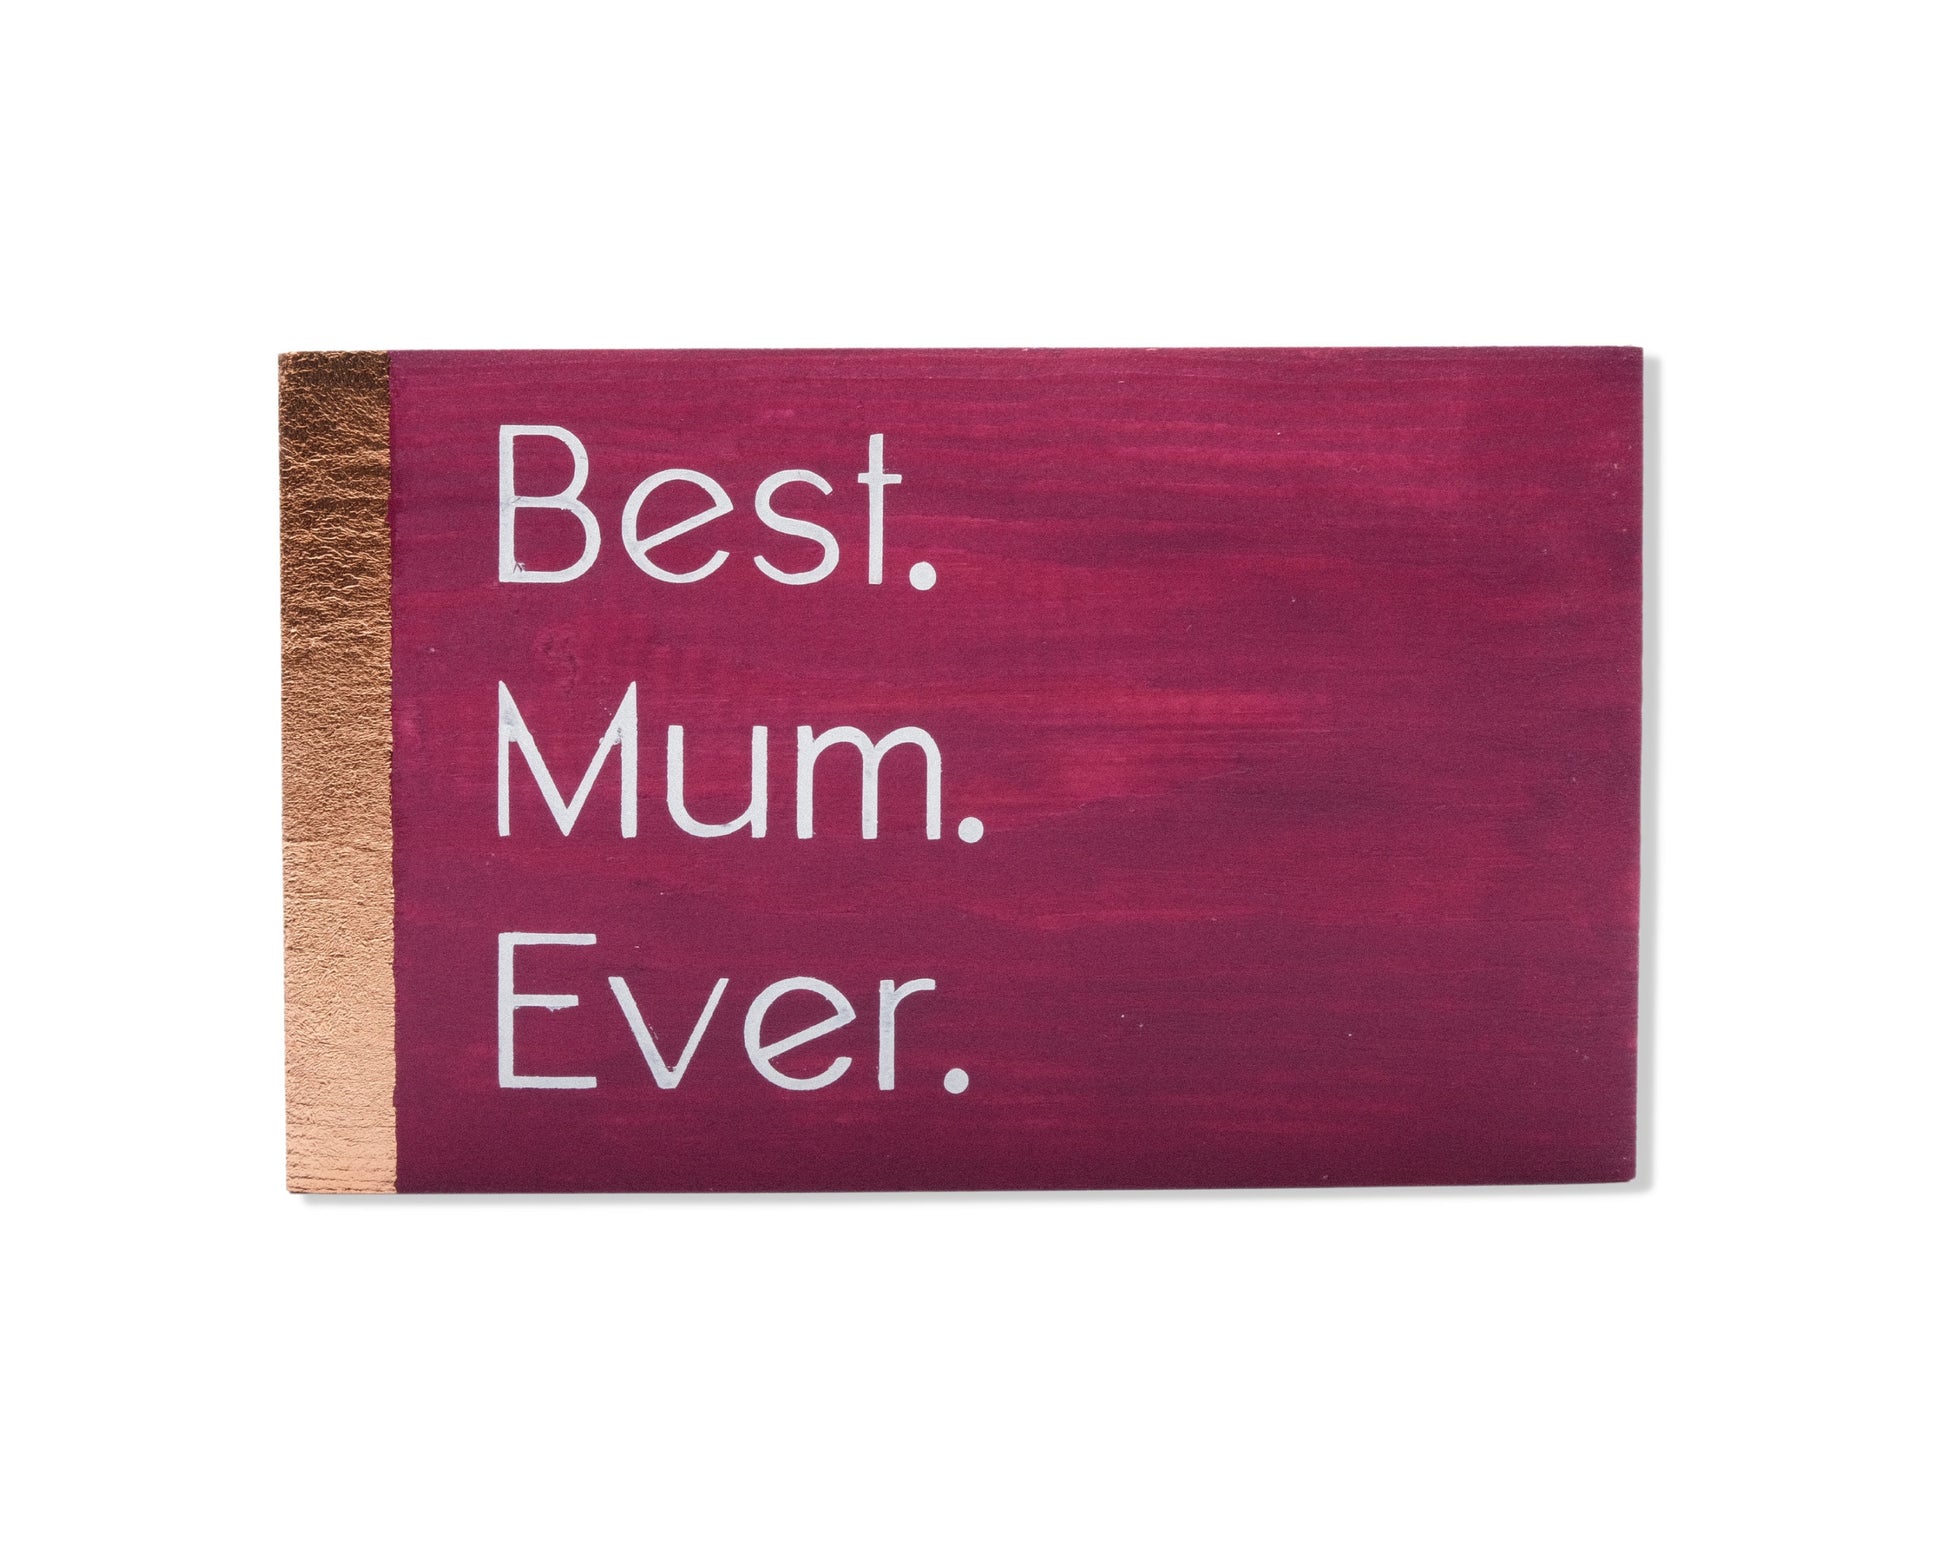 Small freestanding rectangular wooden sign facing straight on. Magenta color with bronze rose gold vertical border on left side only. White painted message, Best. Mum. Ever. Studio style photo on white background.